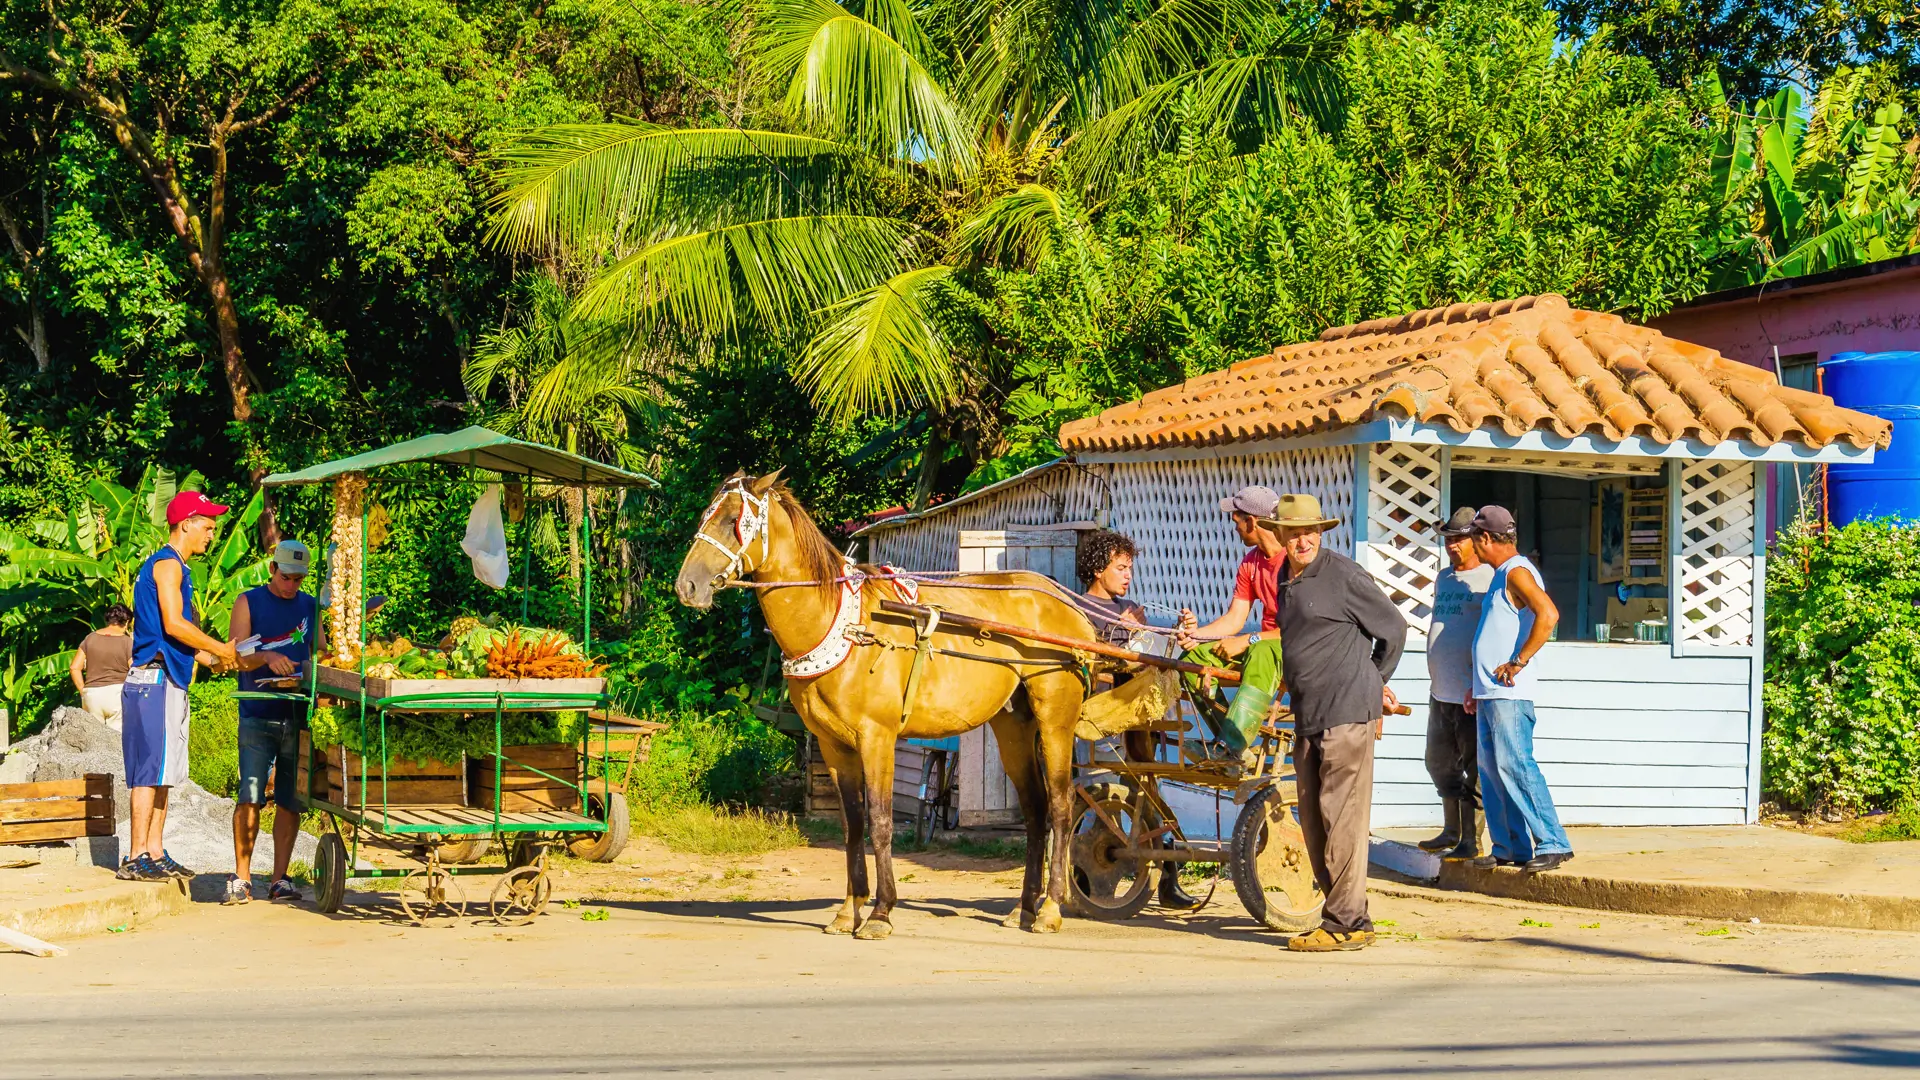 shutterstock_253726642  The main street of Vinales with street stalls.jpg